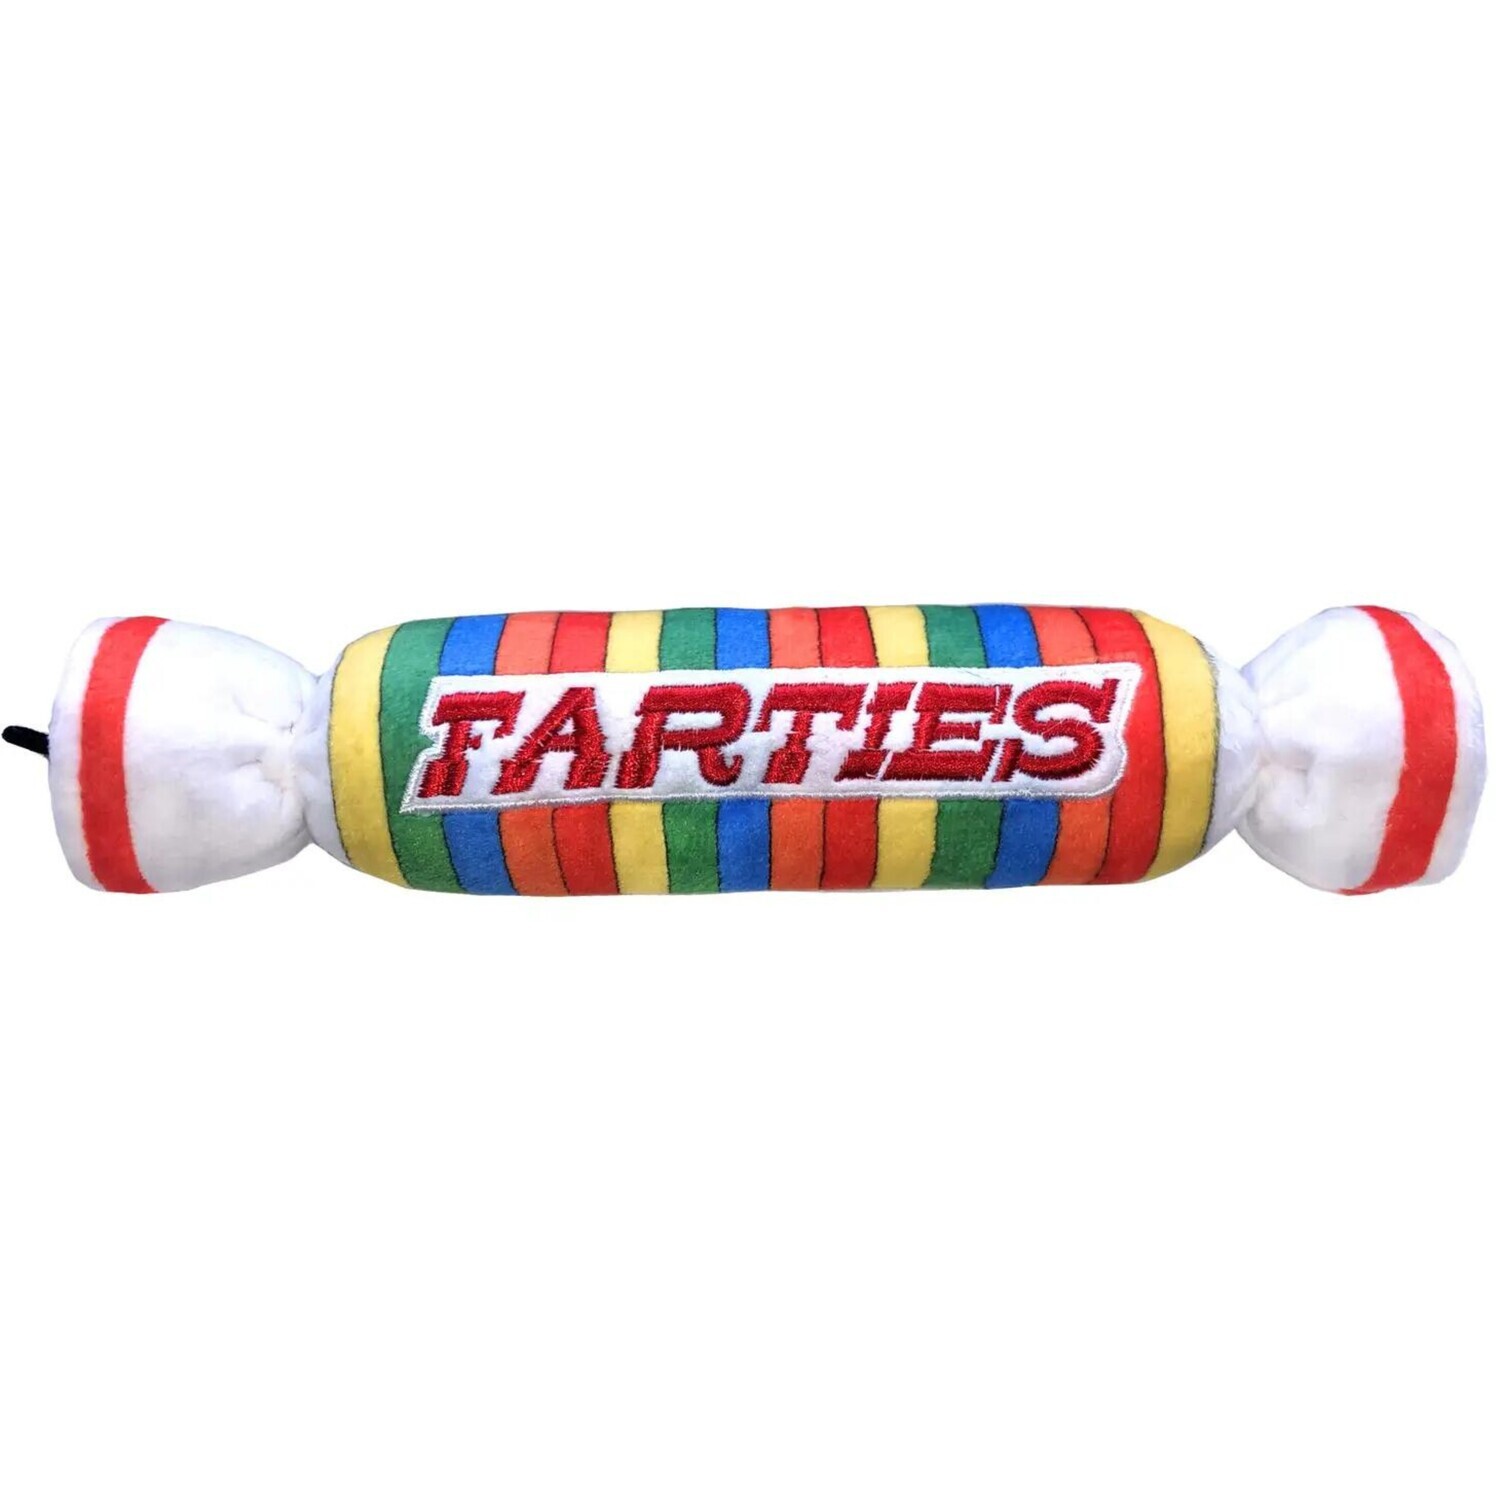 FARTIES DOG TOY